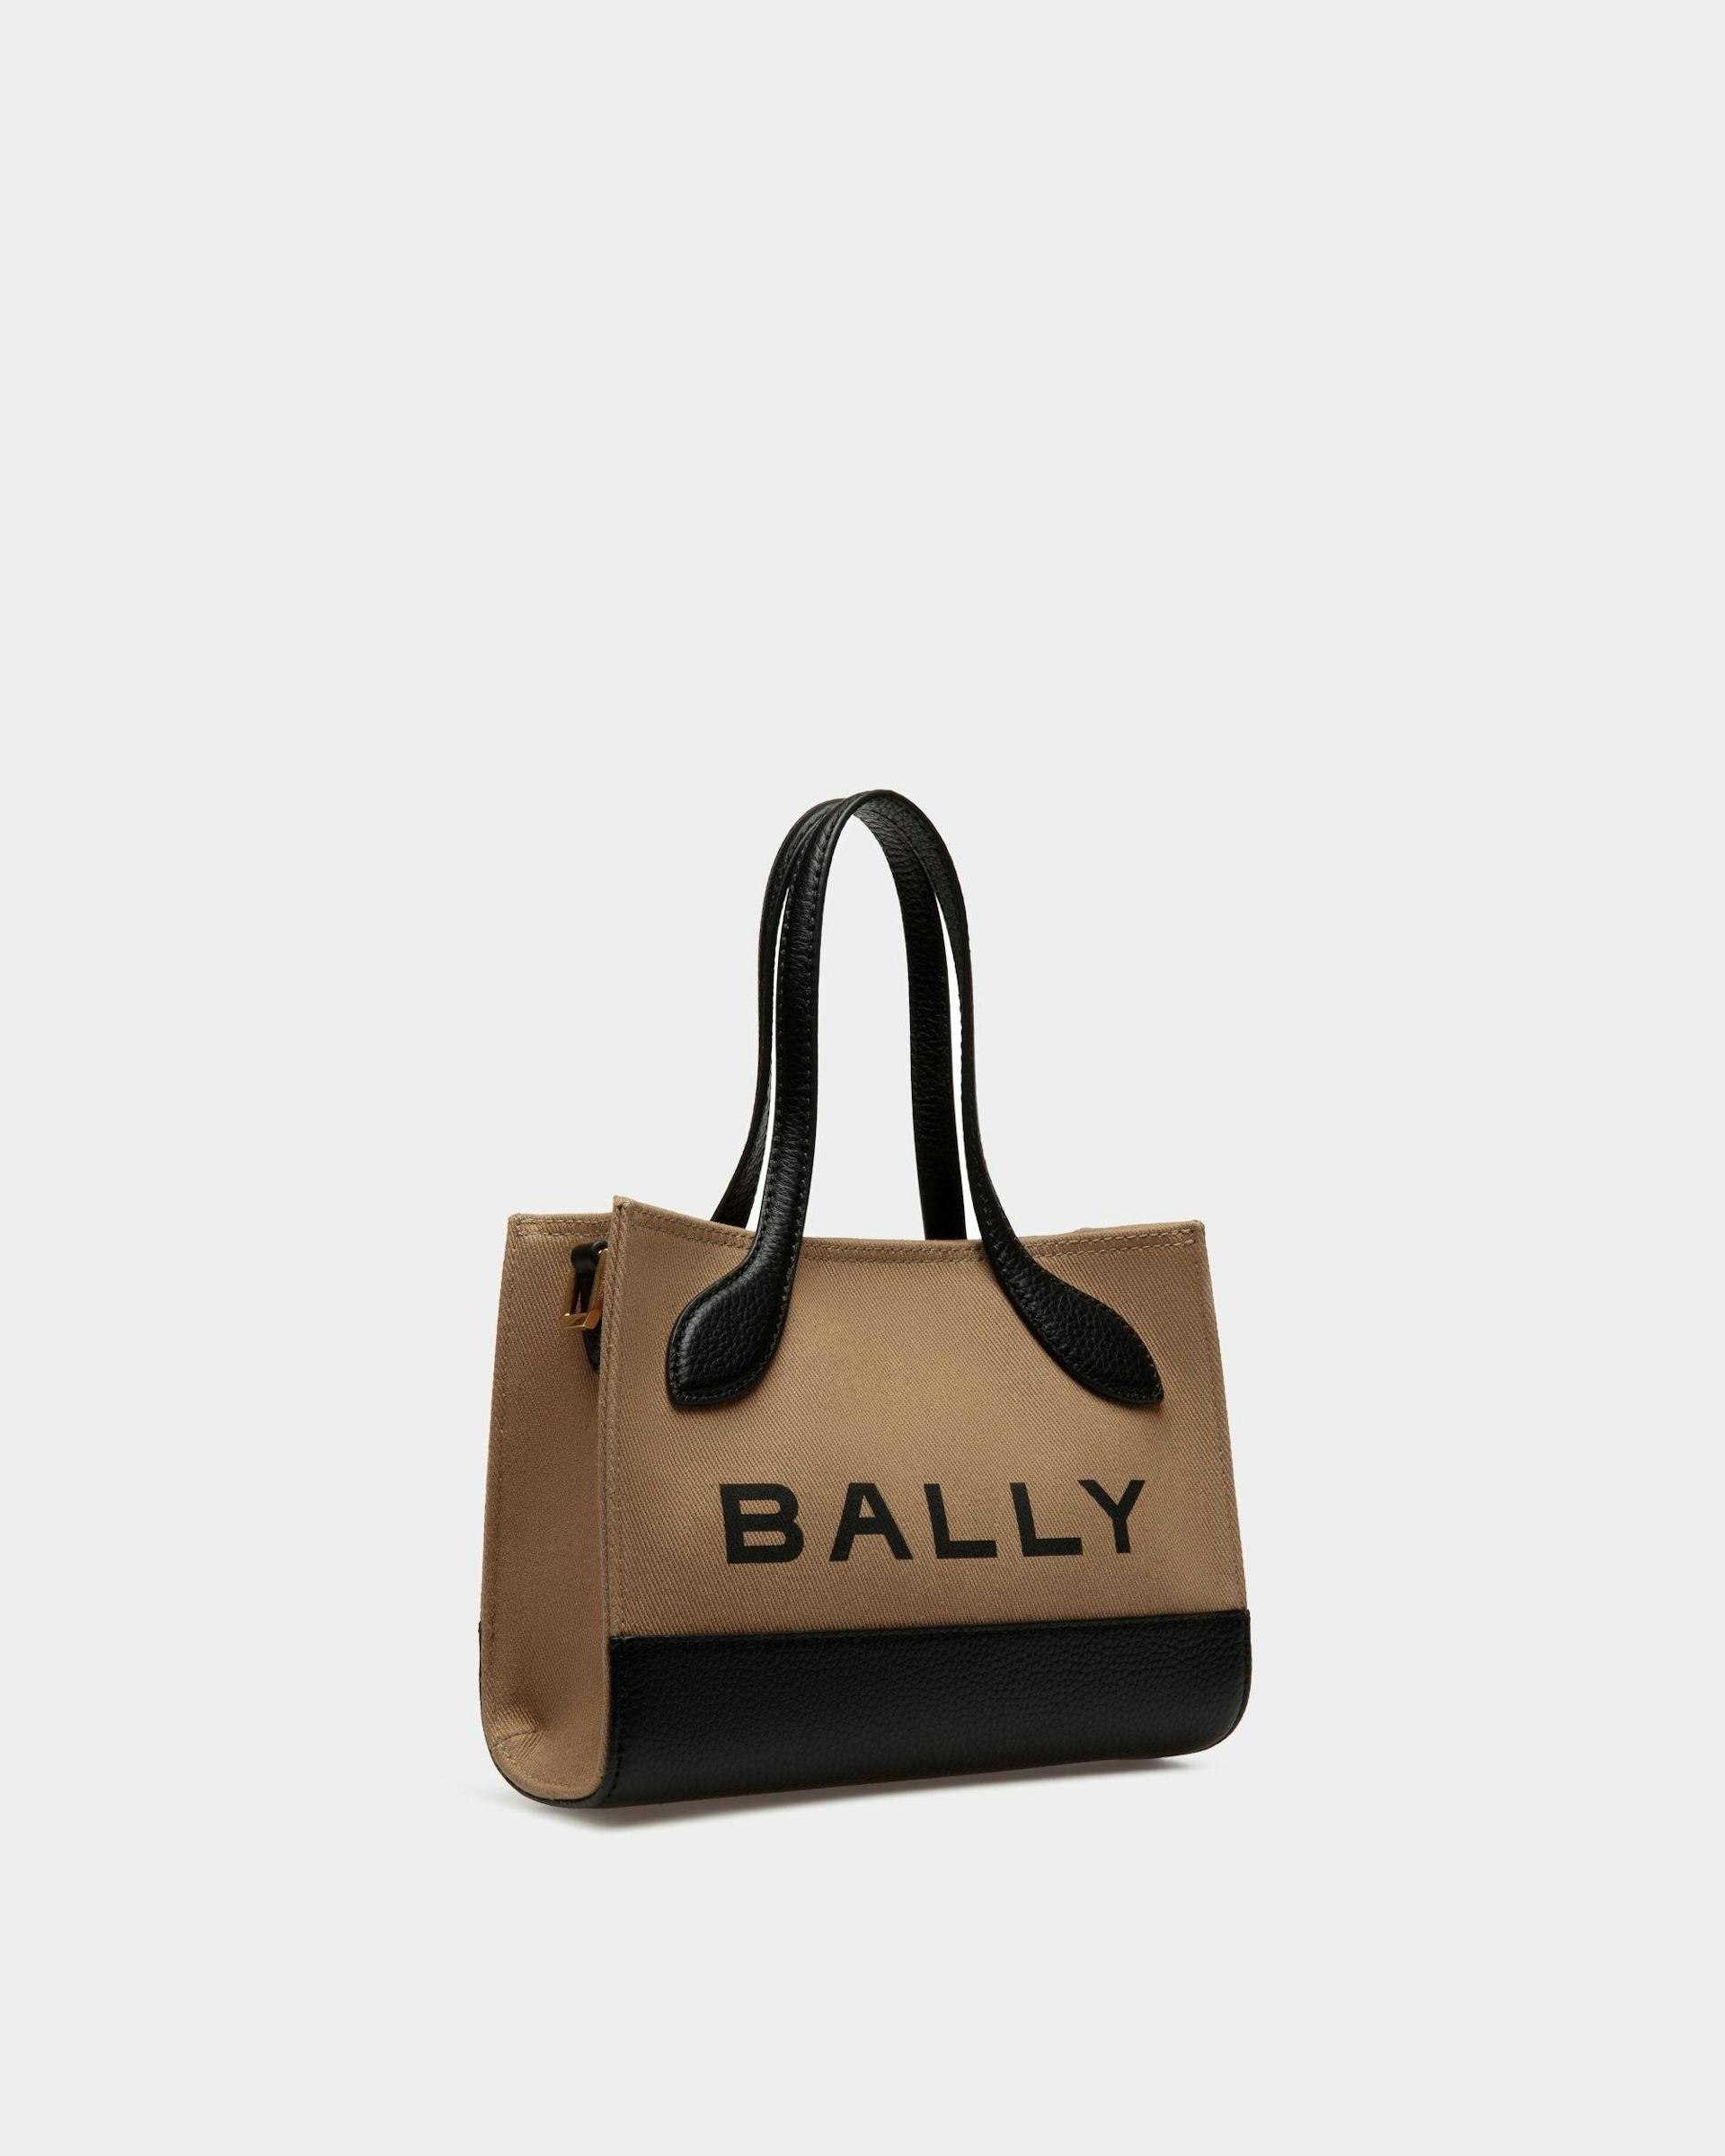 Women's Bar Minibag In Sand And Black Fabric | Bally | Still Life 3/4 Front